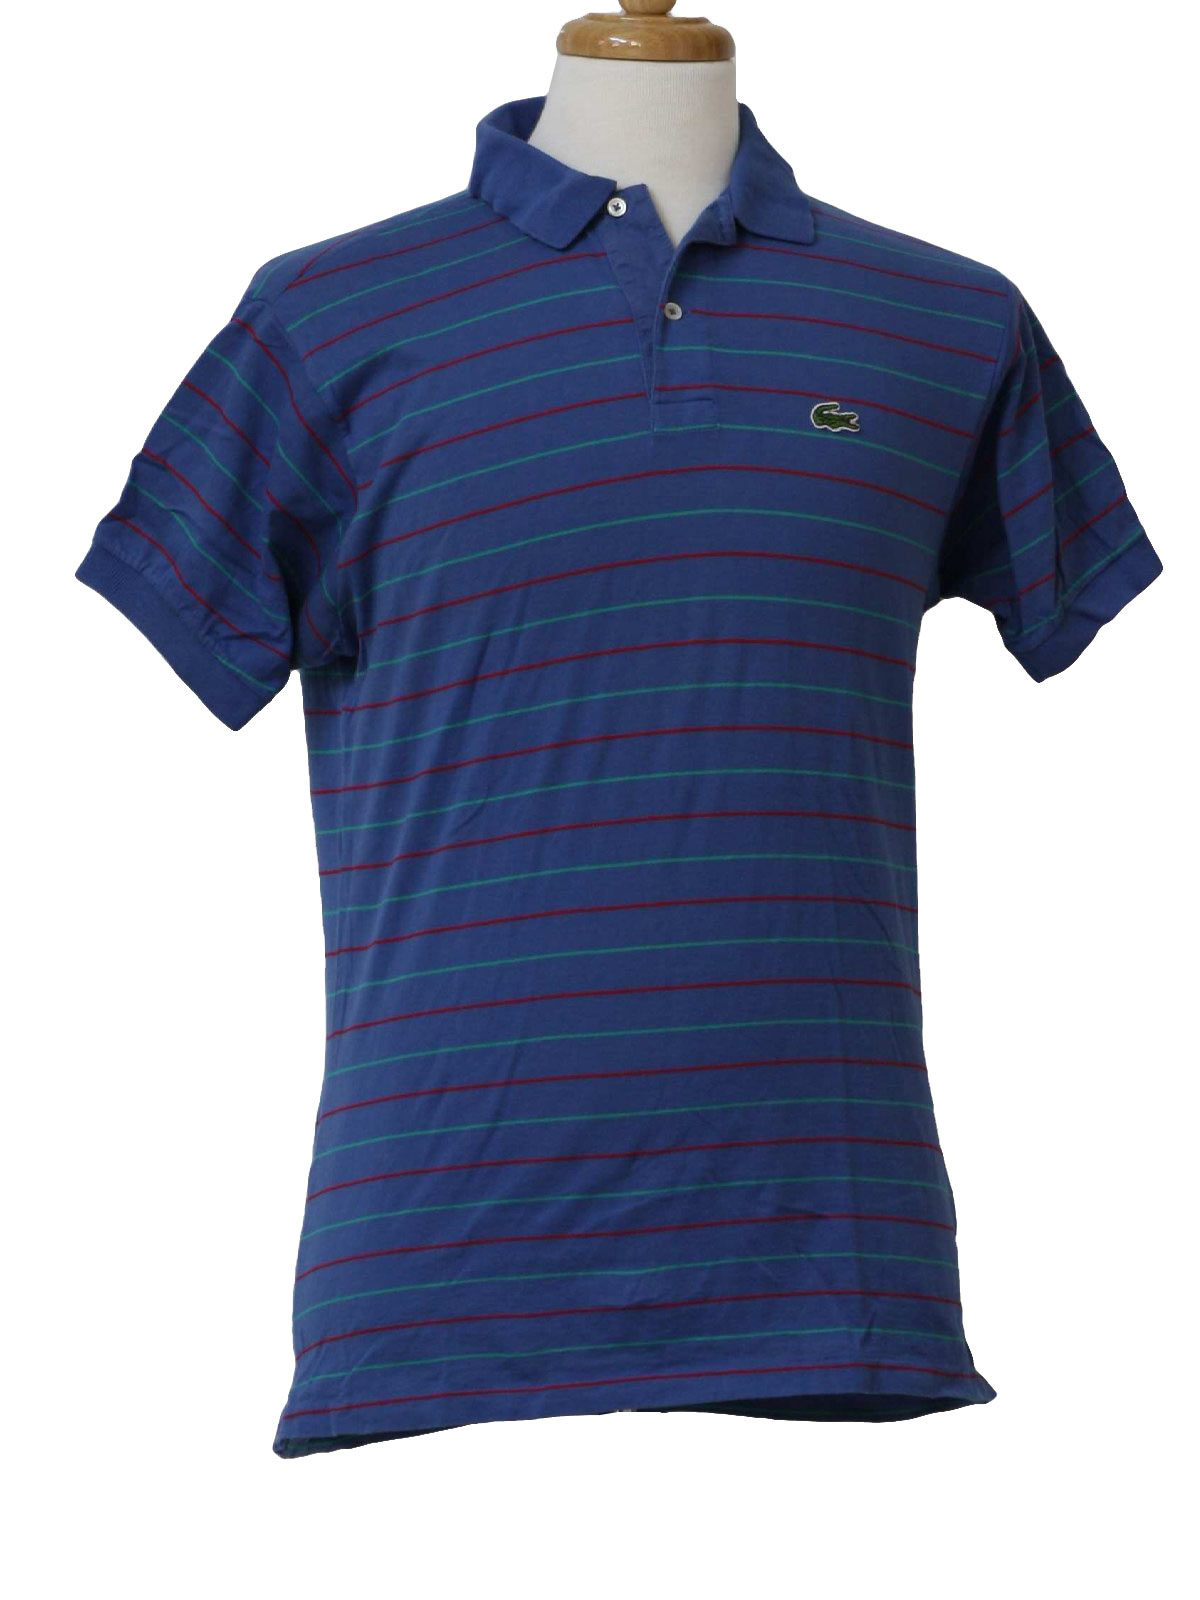 Download 80's Izod Shirt: 80s -Izod- Mens blue, teal and red ...